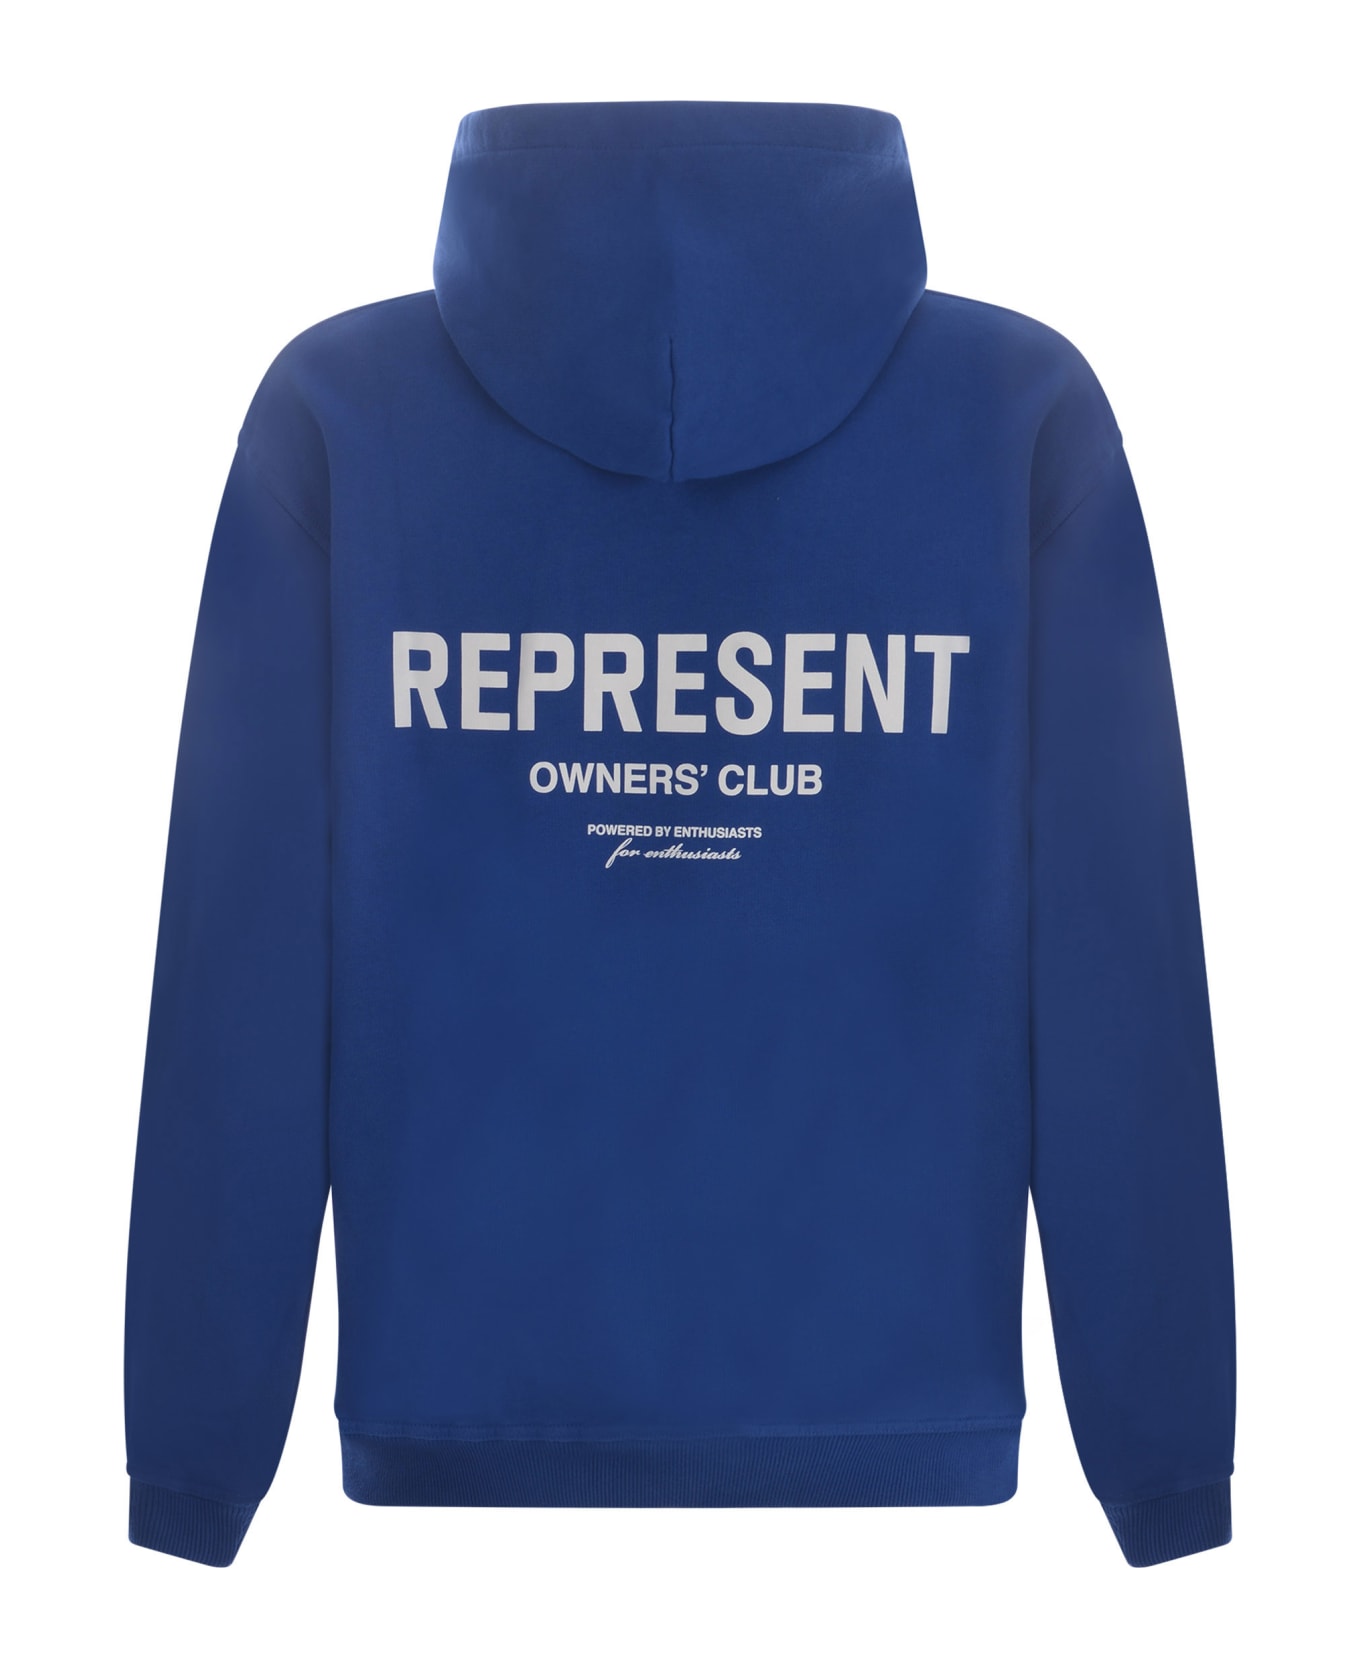 REPRESENT Hooded Sweatshirt Represent "owners' Club" In Cotton - Cobalto フリース